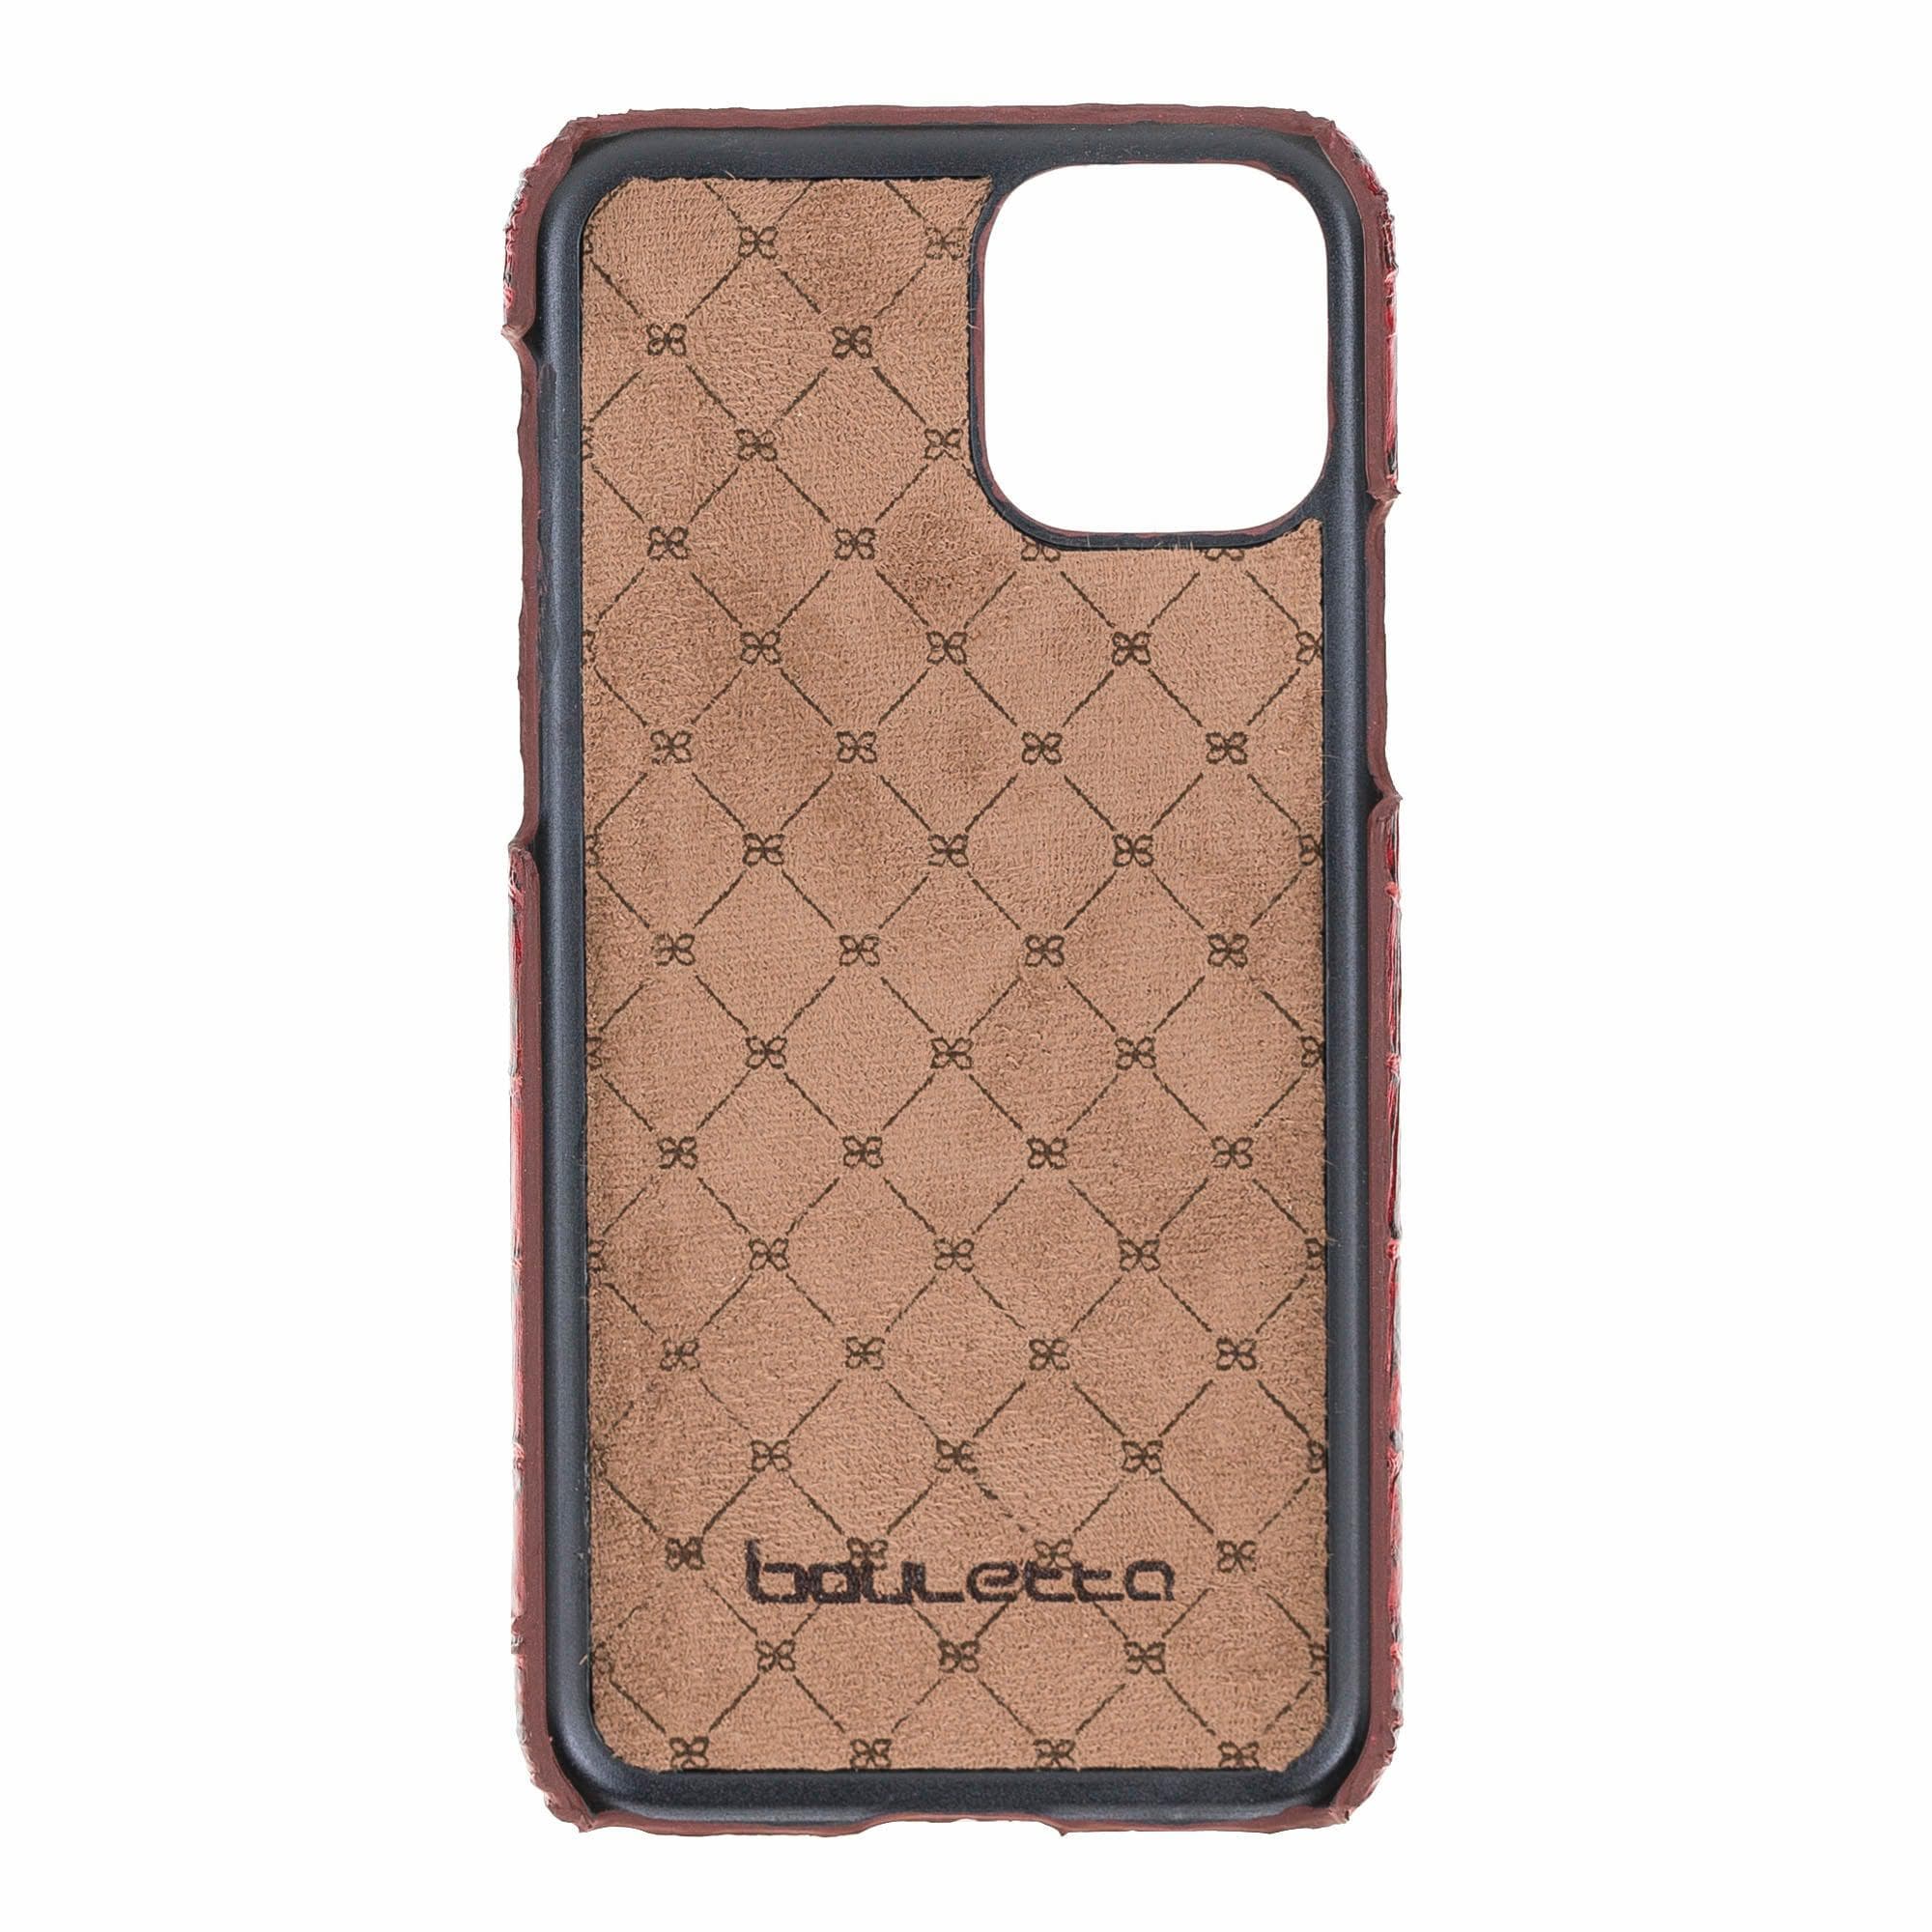 Mobile Phone Cases Ultimate Jacket Leather Wallet Case For Apple iPhone 11 Series Bouletta Shop